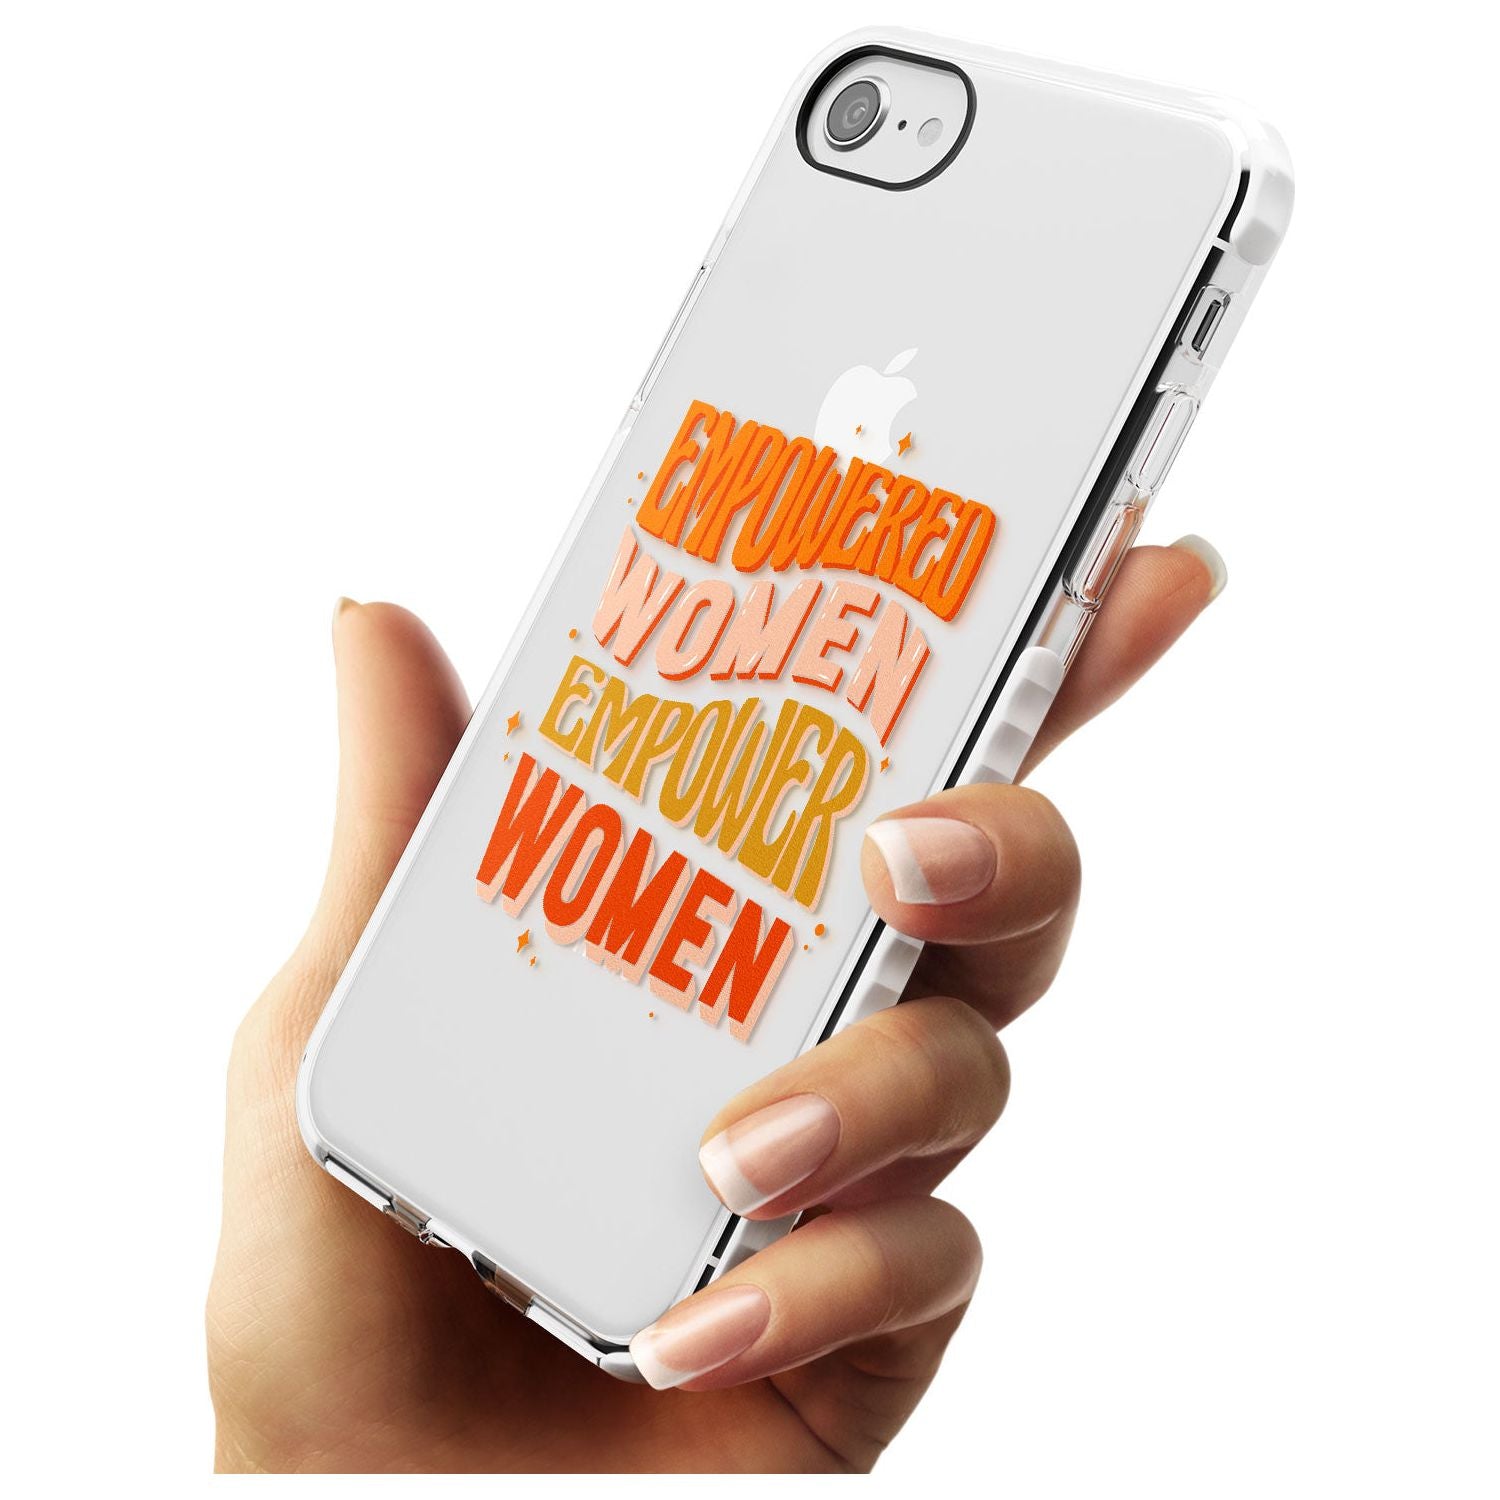 Empowered Women Impact Phone Case for iPhone SE 8 7 Plus